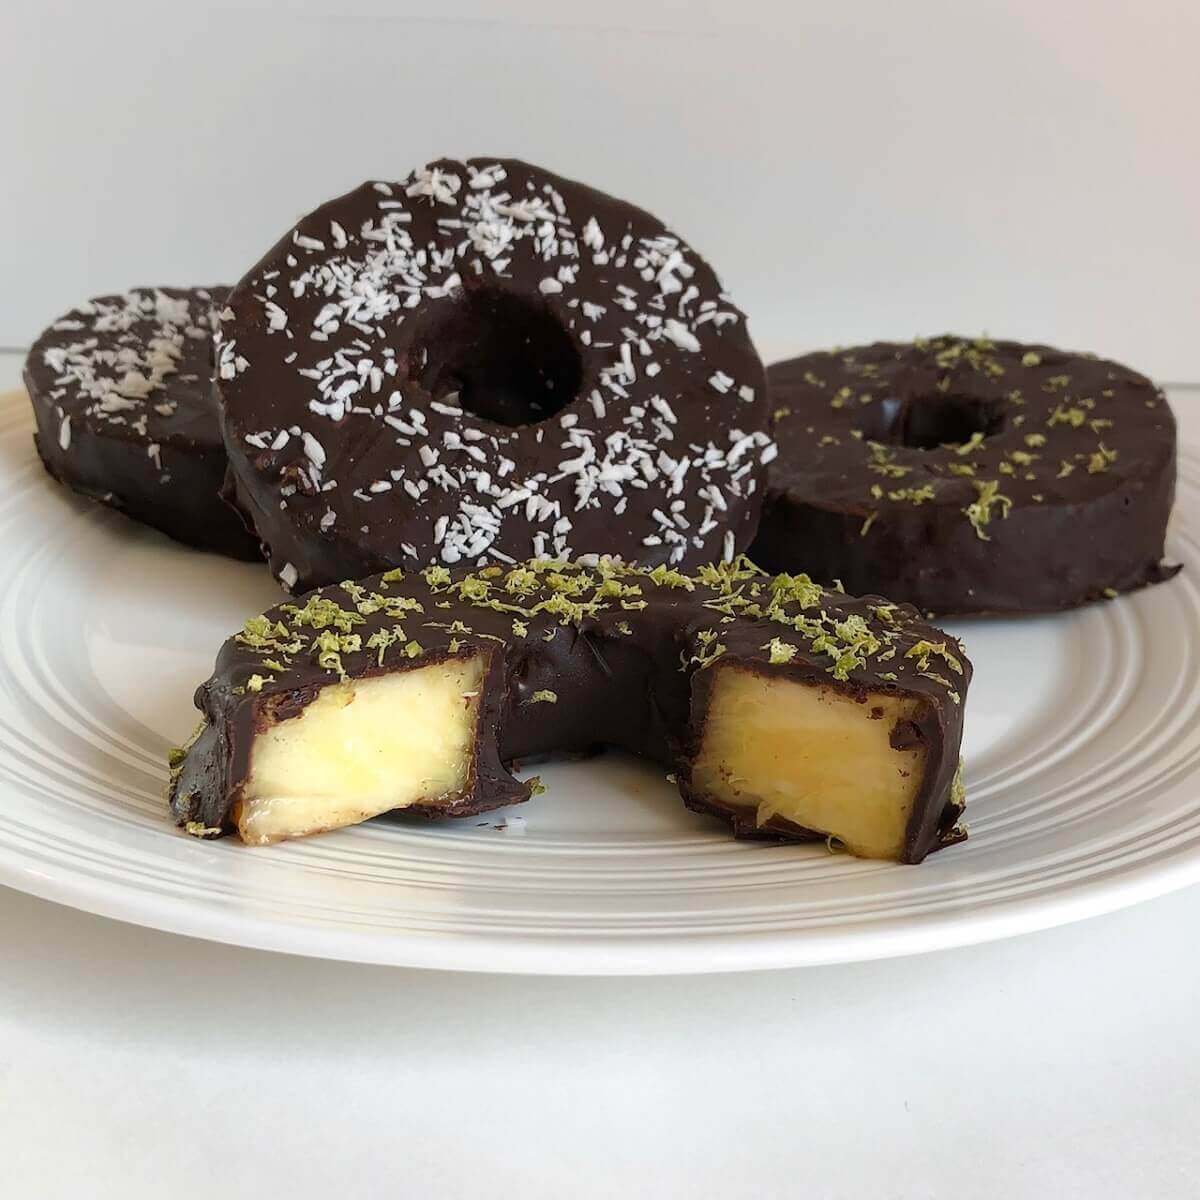 Four chocolate covered pineapple rings on a white plate.